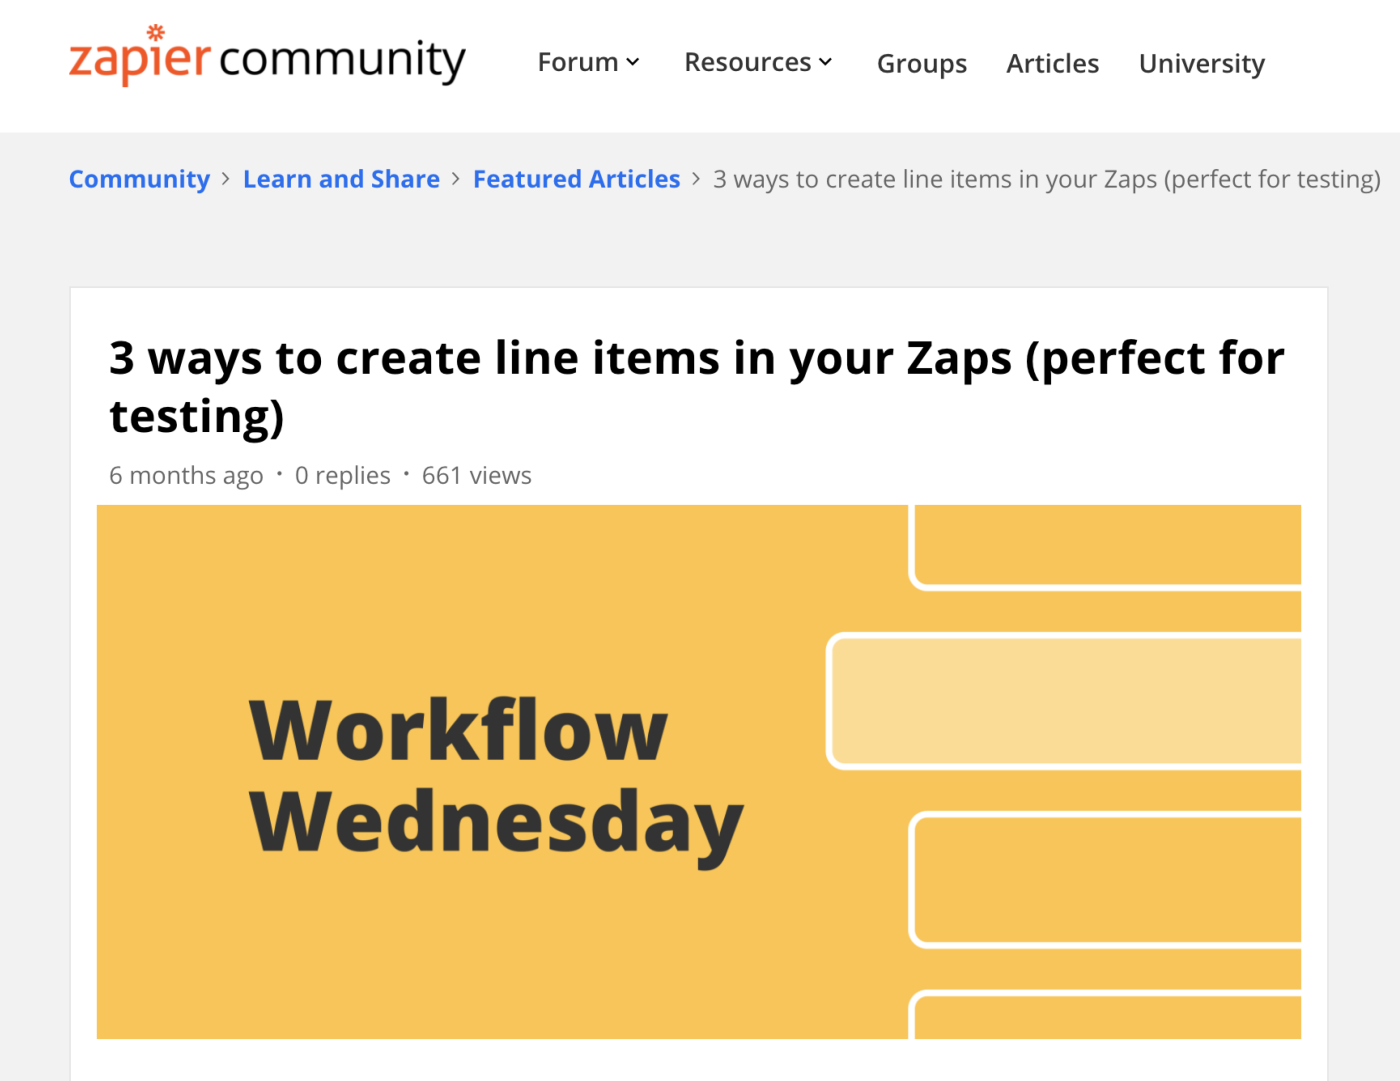 A post in the Zapier Community about line items